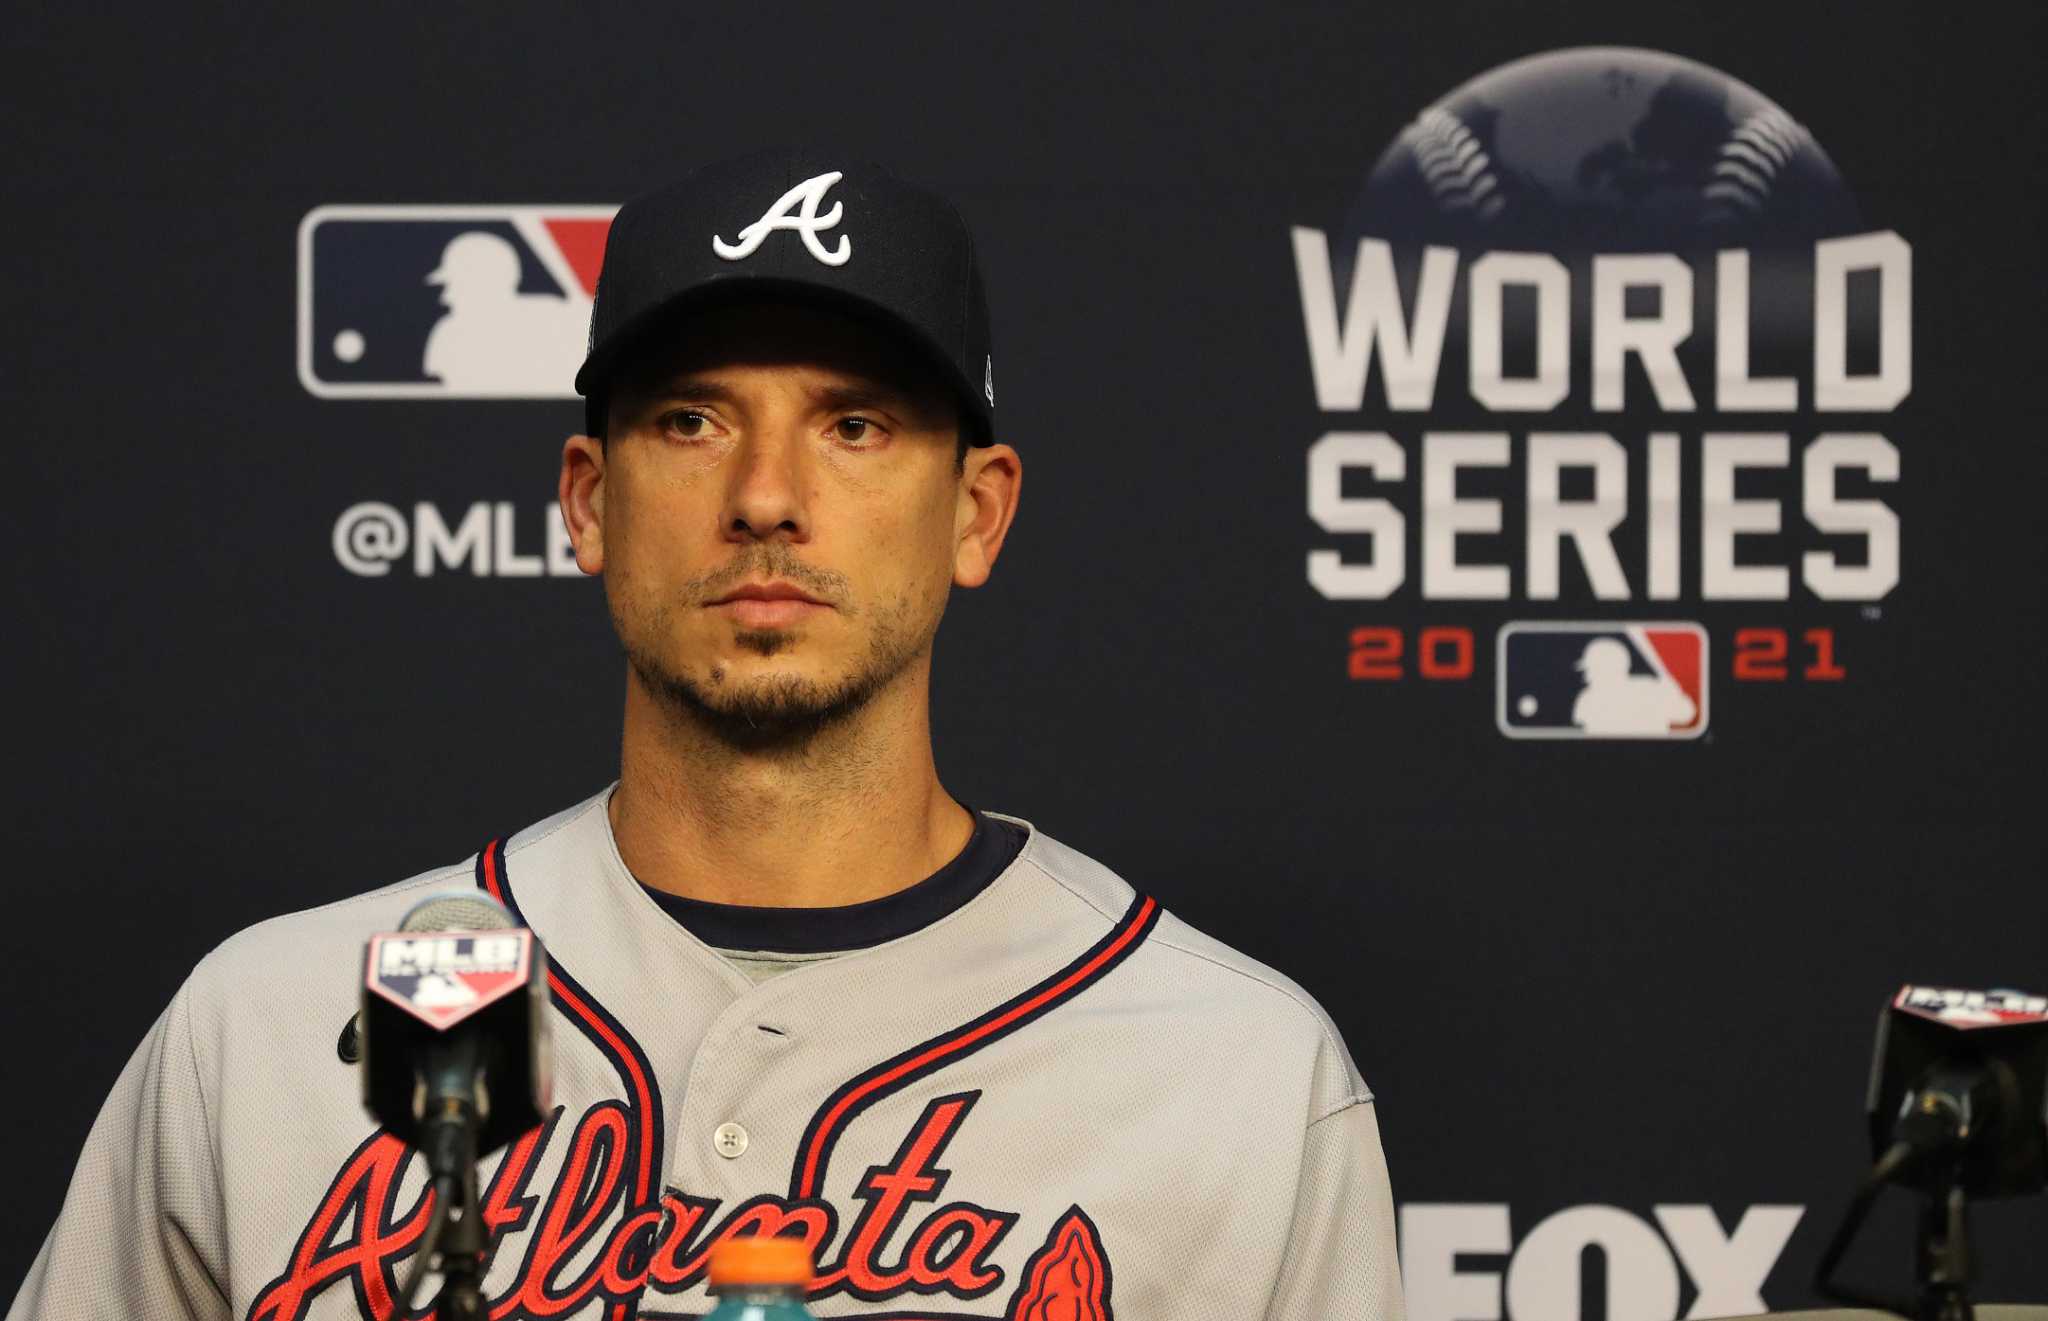 Meet the most popular player in the World Series: Everyone loves Charlie  Morton